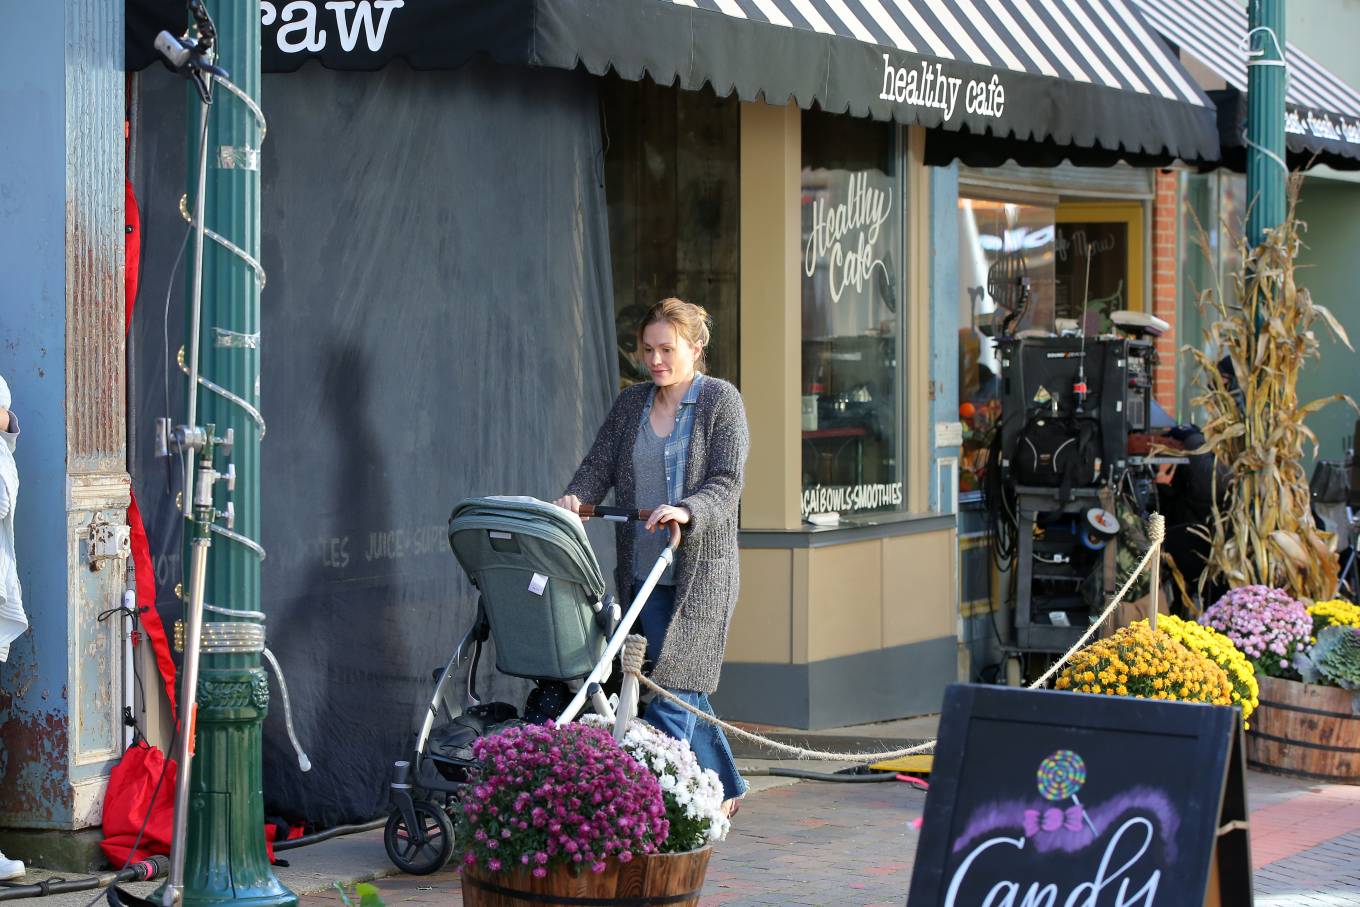 Anna Paquin – On the set of ‘Modern Love’ filming at Healthy Cafe in Schenectady